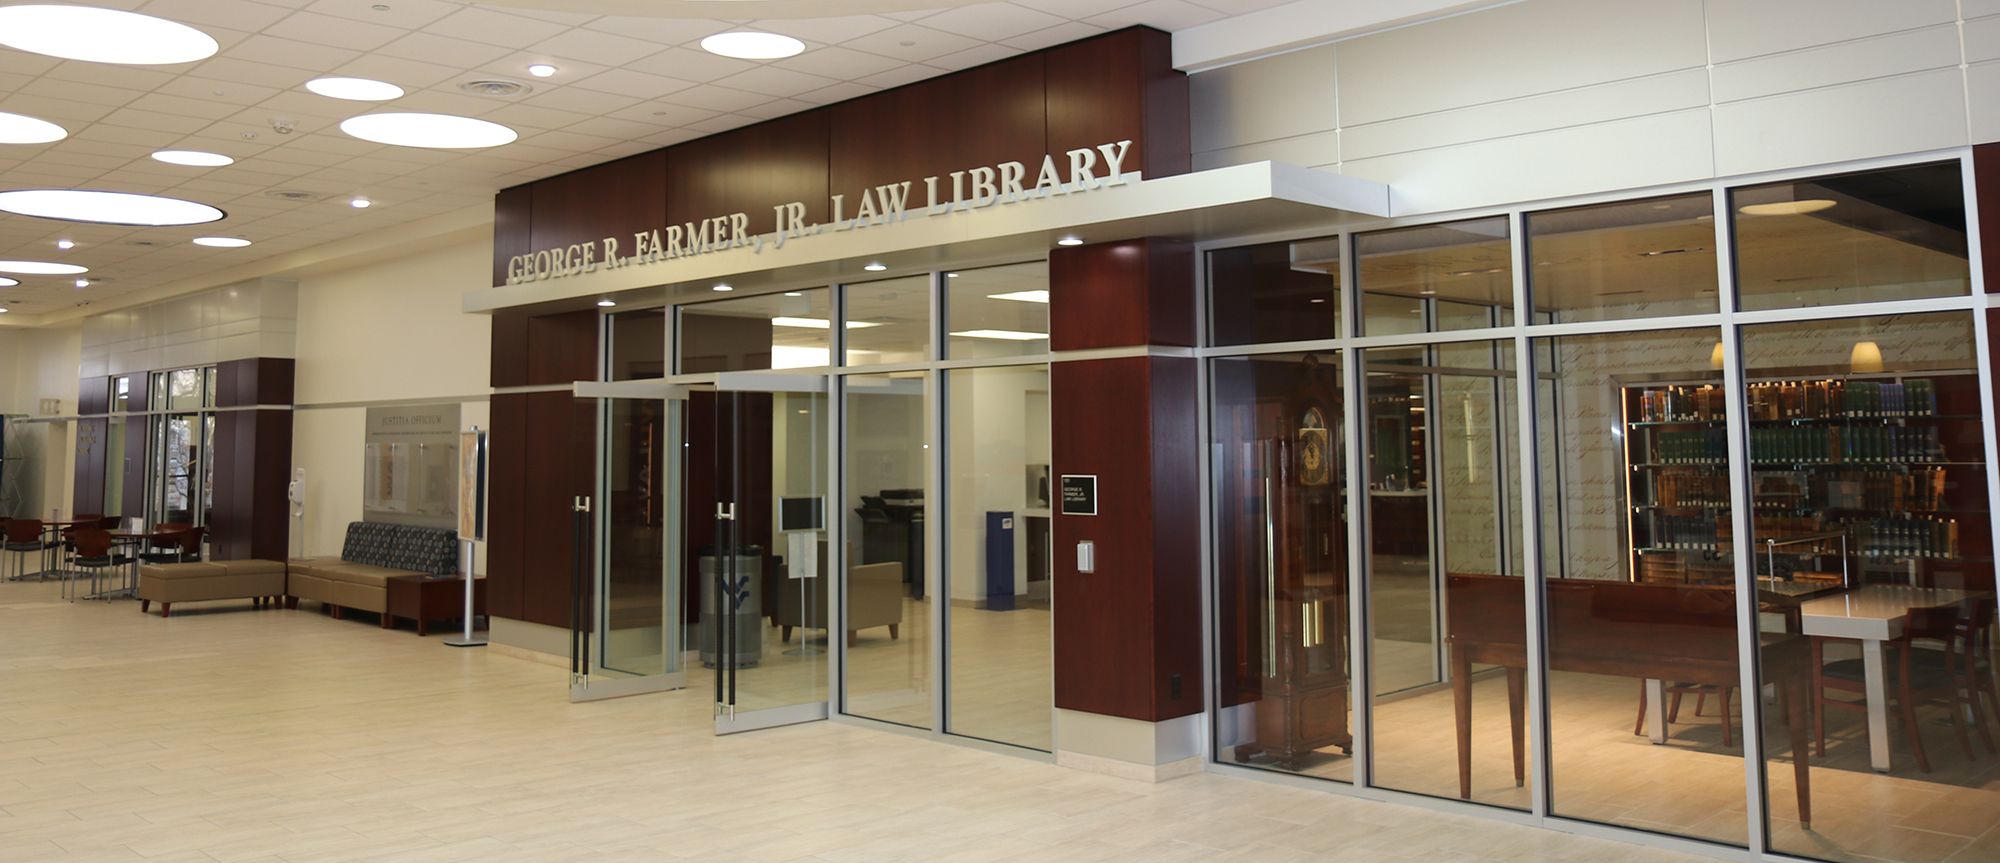 WVU Law Law Library Entrance